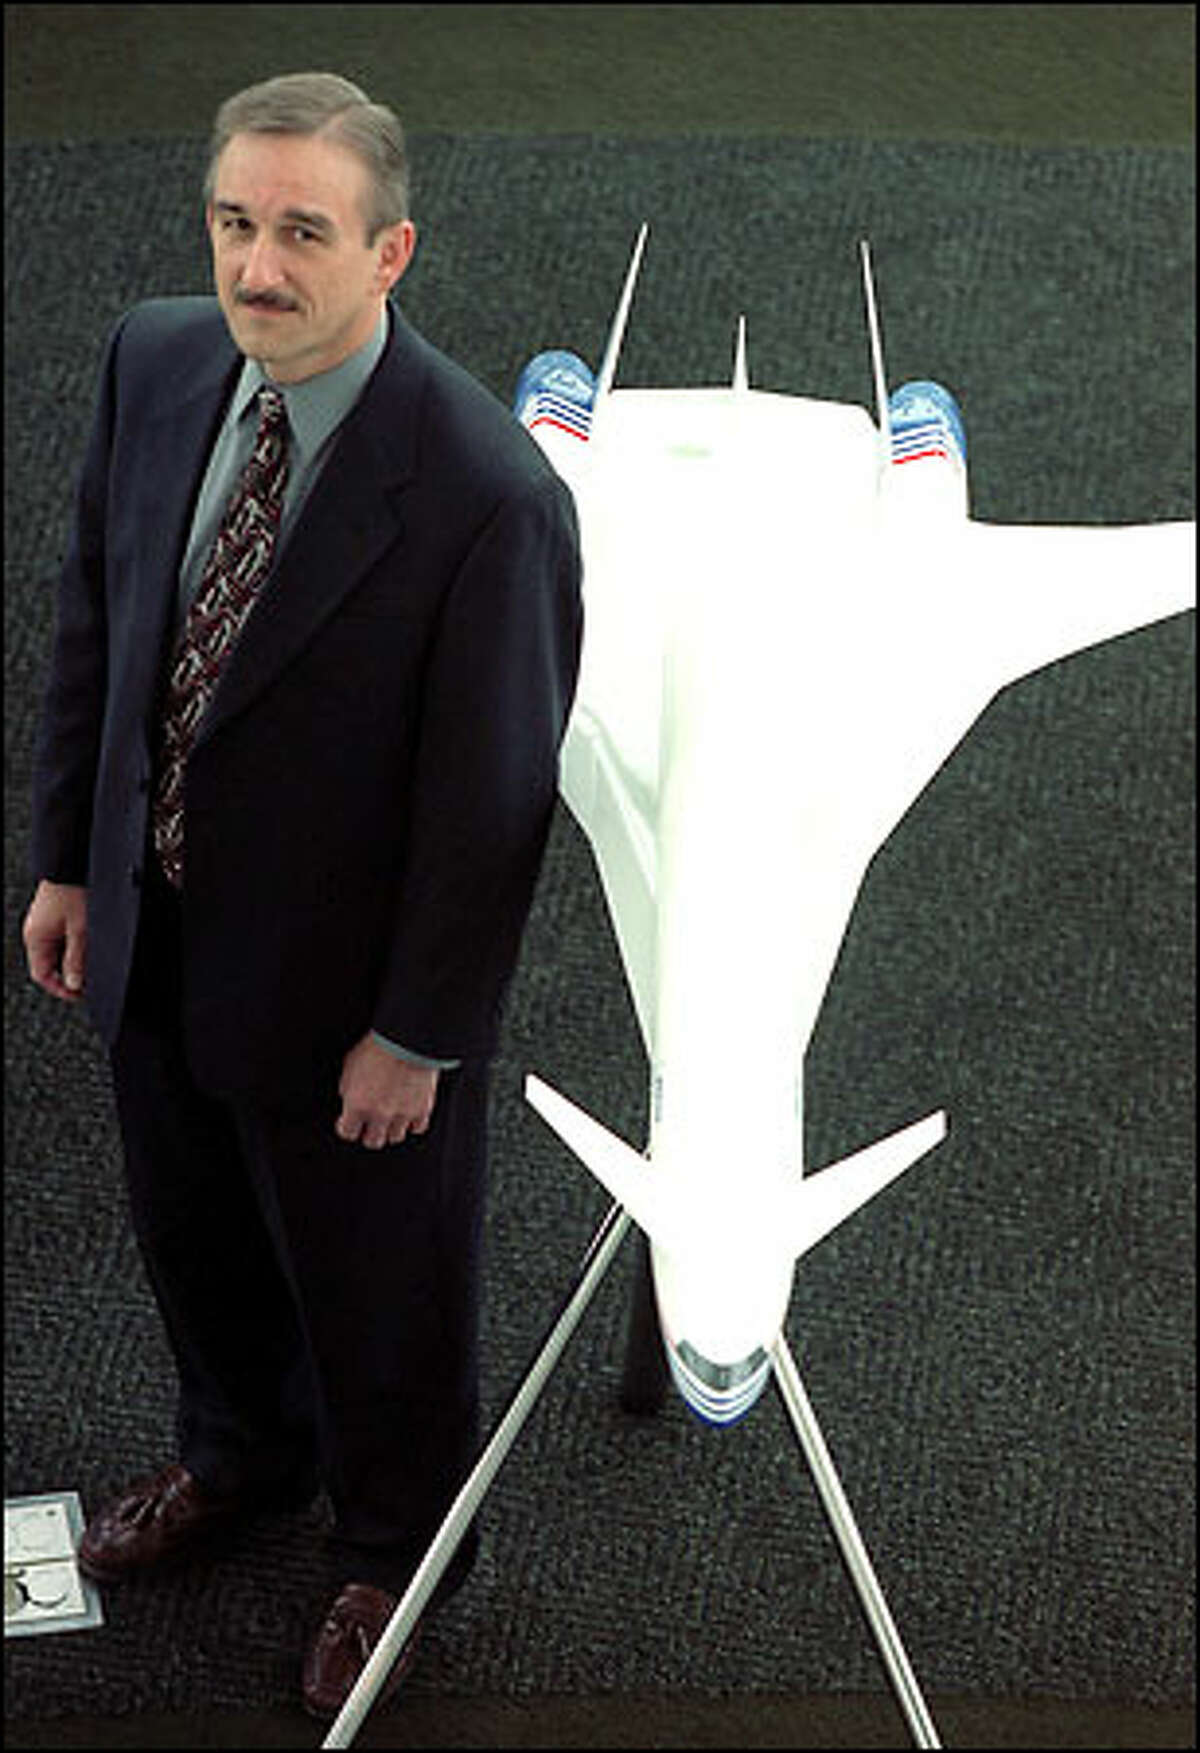 Tom Waggener, newly named director of marketing for The Boeing Co.'s sonic cruiser program, shows a model of the ultrafast jet. To aid in the development of the sonic cruiser, Waggener has been meeting a core group of about a dozen major airlines around the world that would be potential customers for the plane. "The major question is how the airlines would use this new plane," he says.